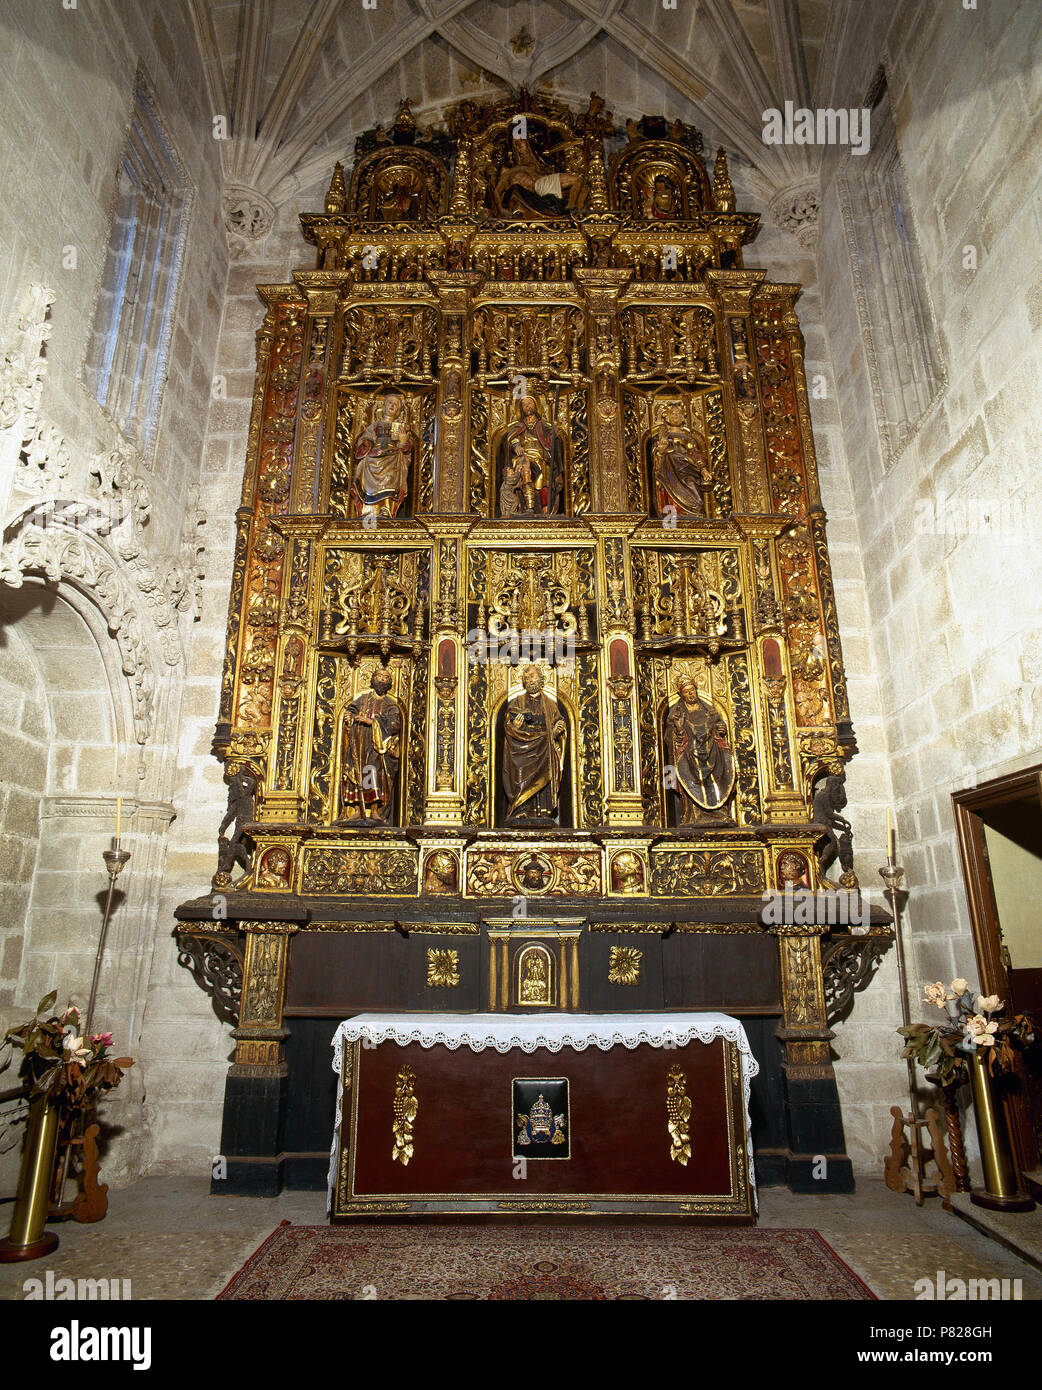 Spain, Galicia, province of La Coruña, Betanzos. Santiago Church. Gothic church built in 15th century by Fernan Perez de Andrade. Altarpiece of the Chapel of St. Peter and St. Paul. Work of the sculptor Cornielles of Holland (16th century). General view. Renaissance style. Stock Photo